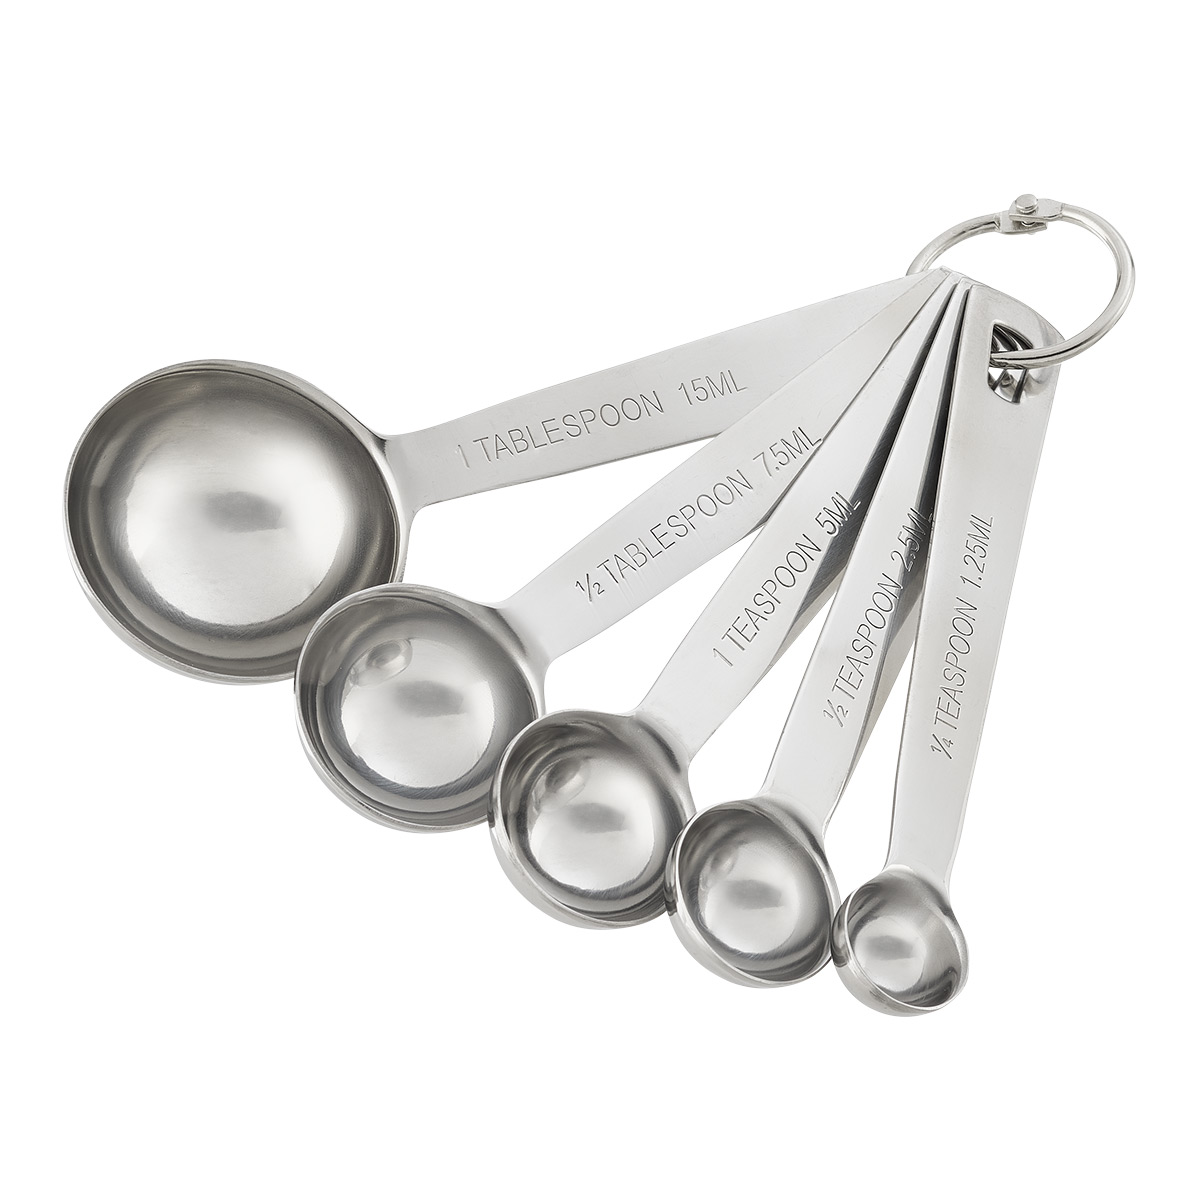 https://www.containerstore.com/catalogimages/473600/10090234-stainless-steel-measuring-s.jpg